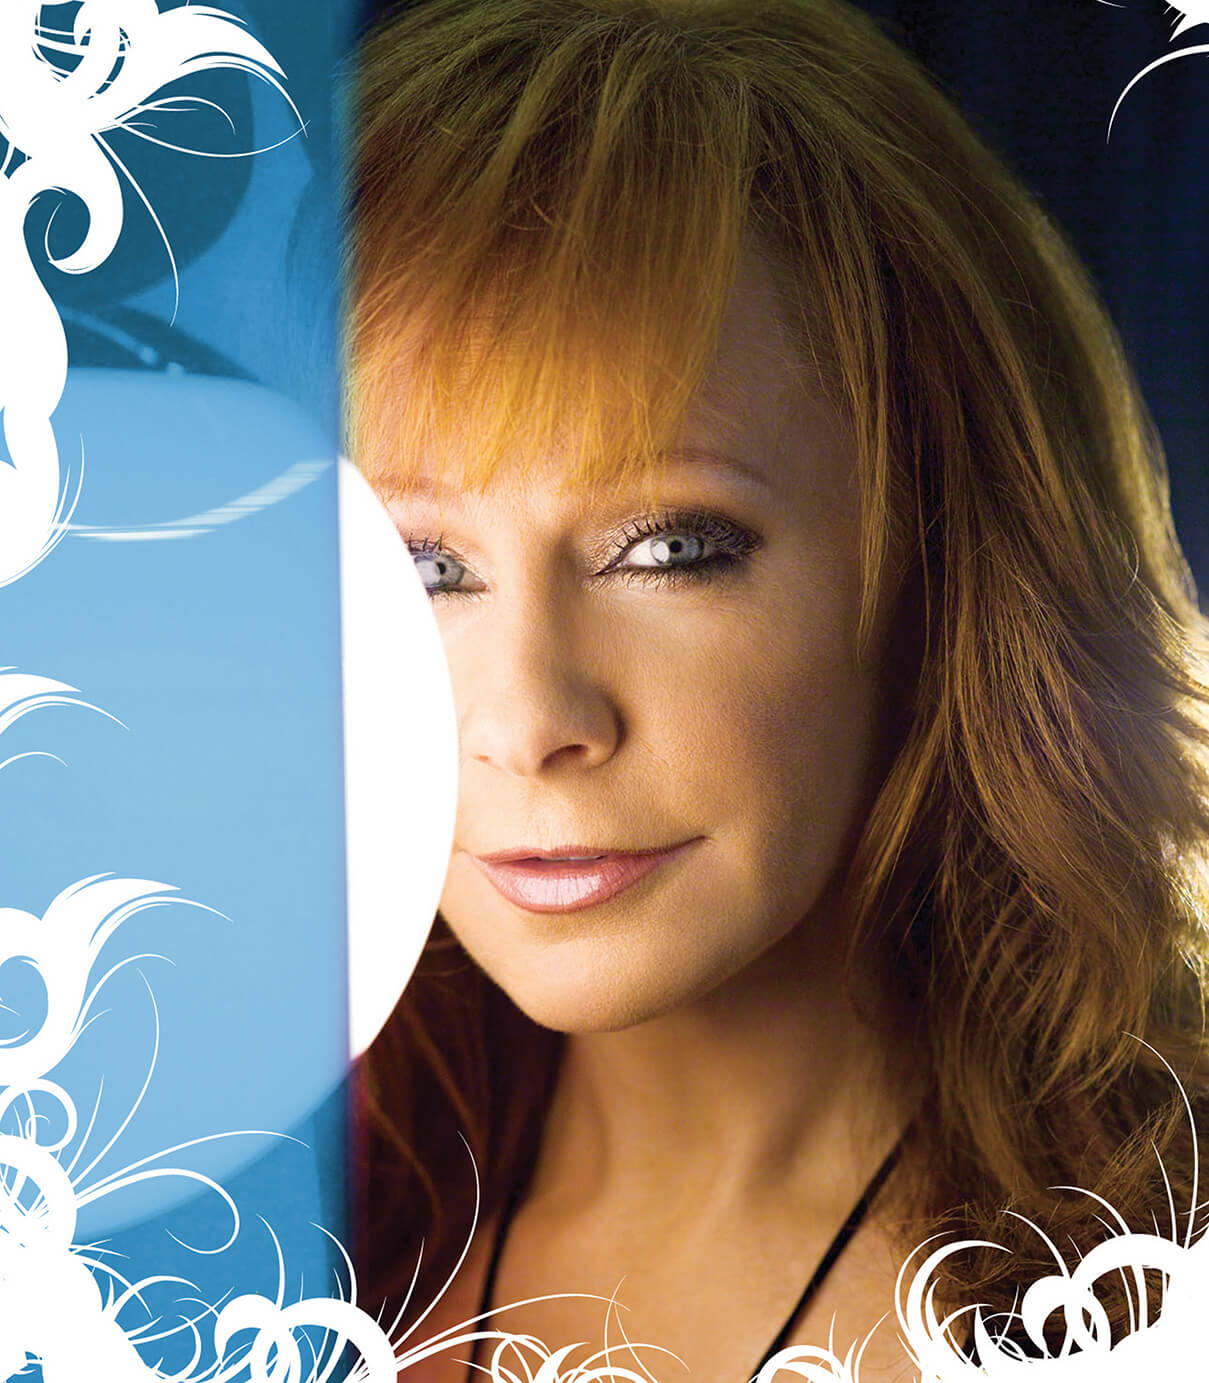 Detail image from packaging booklet design for All The Woman I Am by Reba McEntire for Starstruck Management Group in Nashville, Tennessee